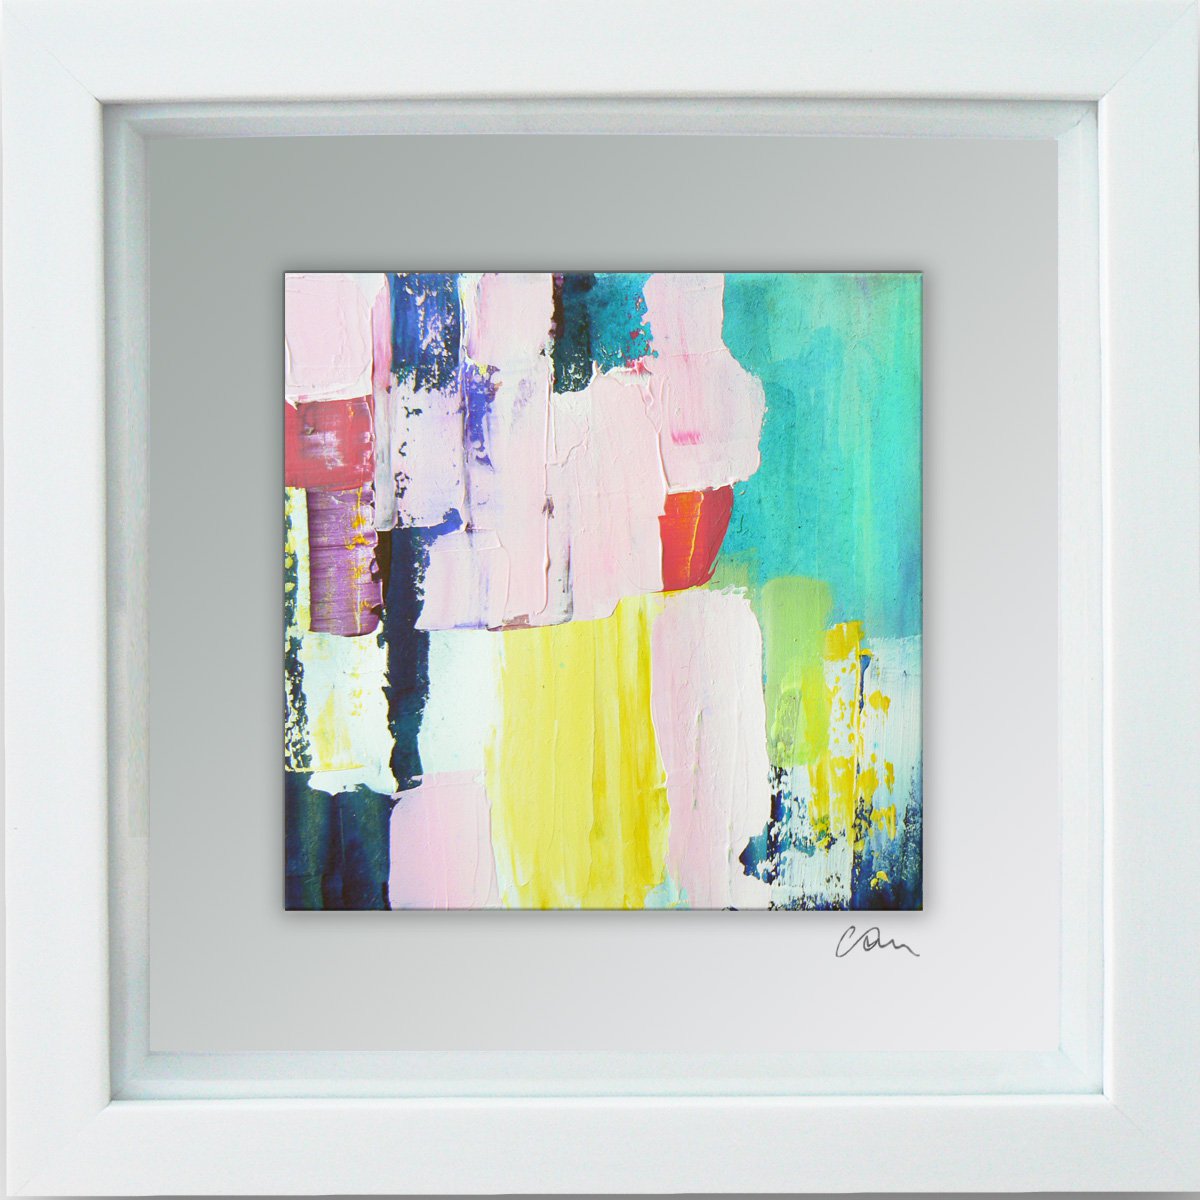 Framed ready to hang original abstract - Petals #4 by Carolynne Coulson